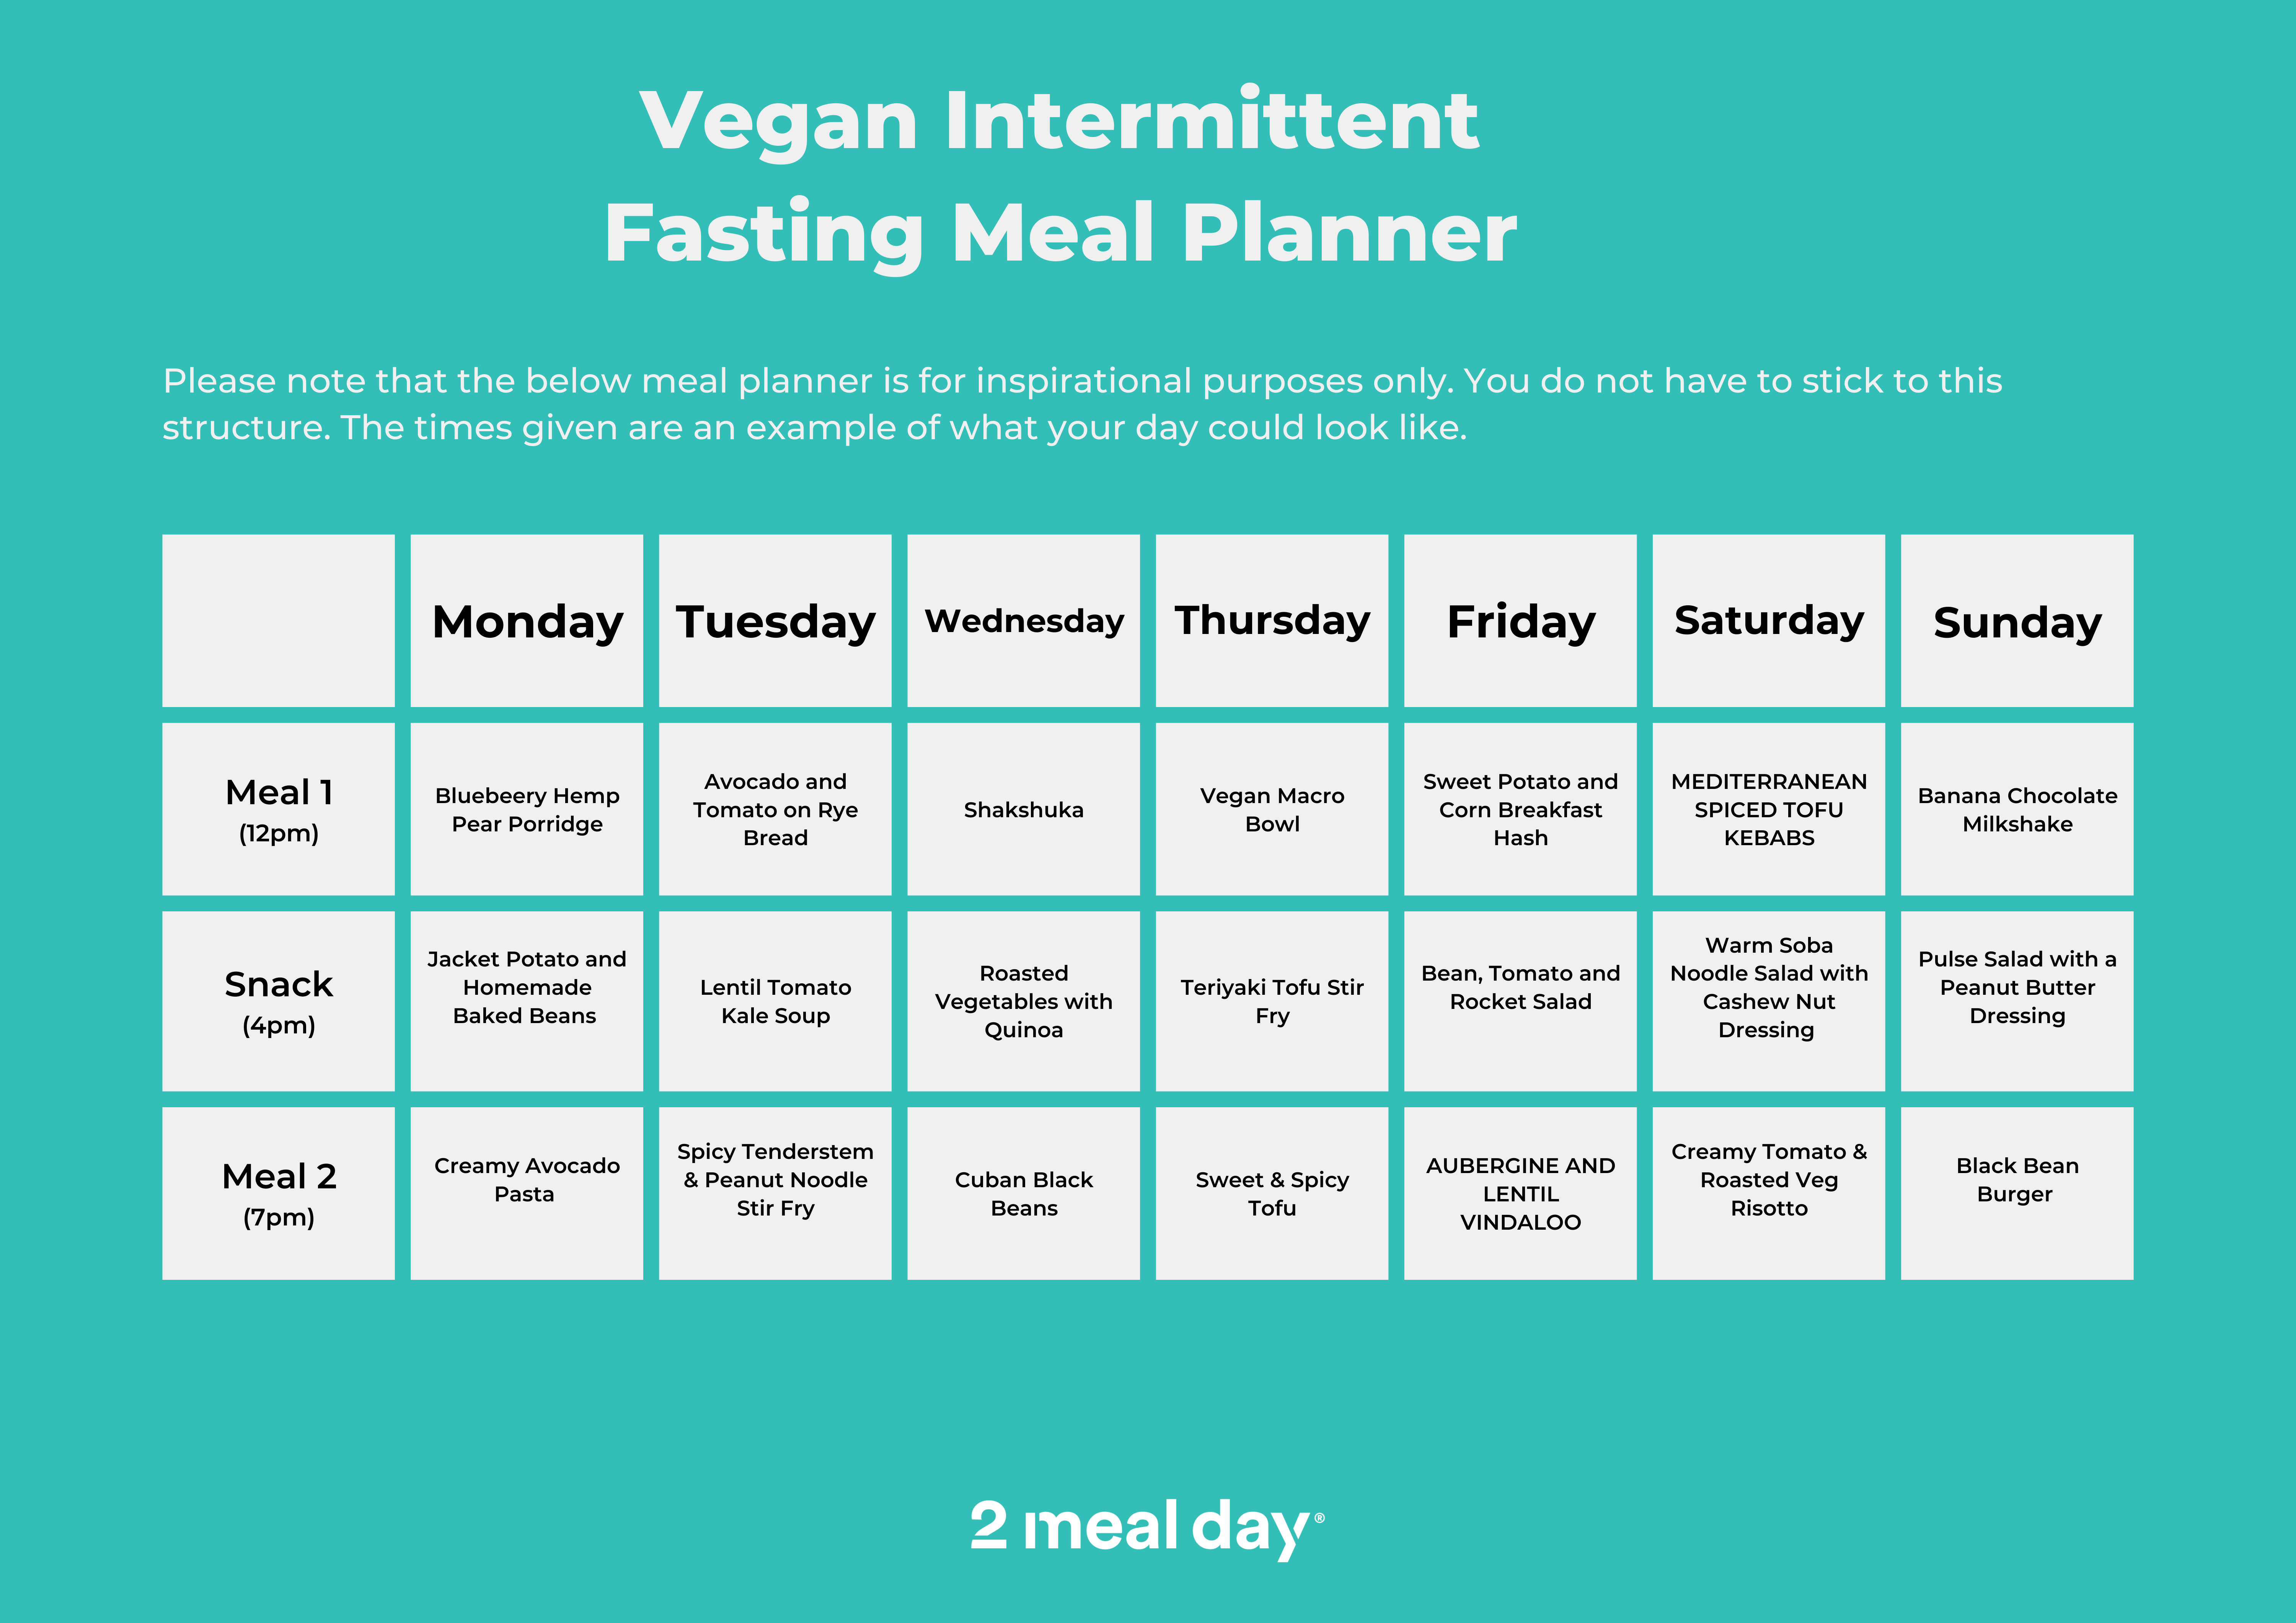 Recommended Vegan Intermittent Fasting Meal Plans | 2 Meal Day ...